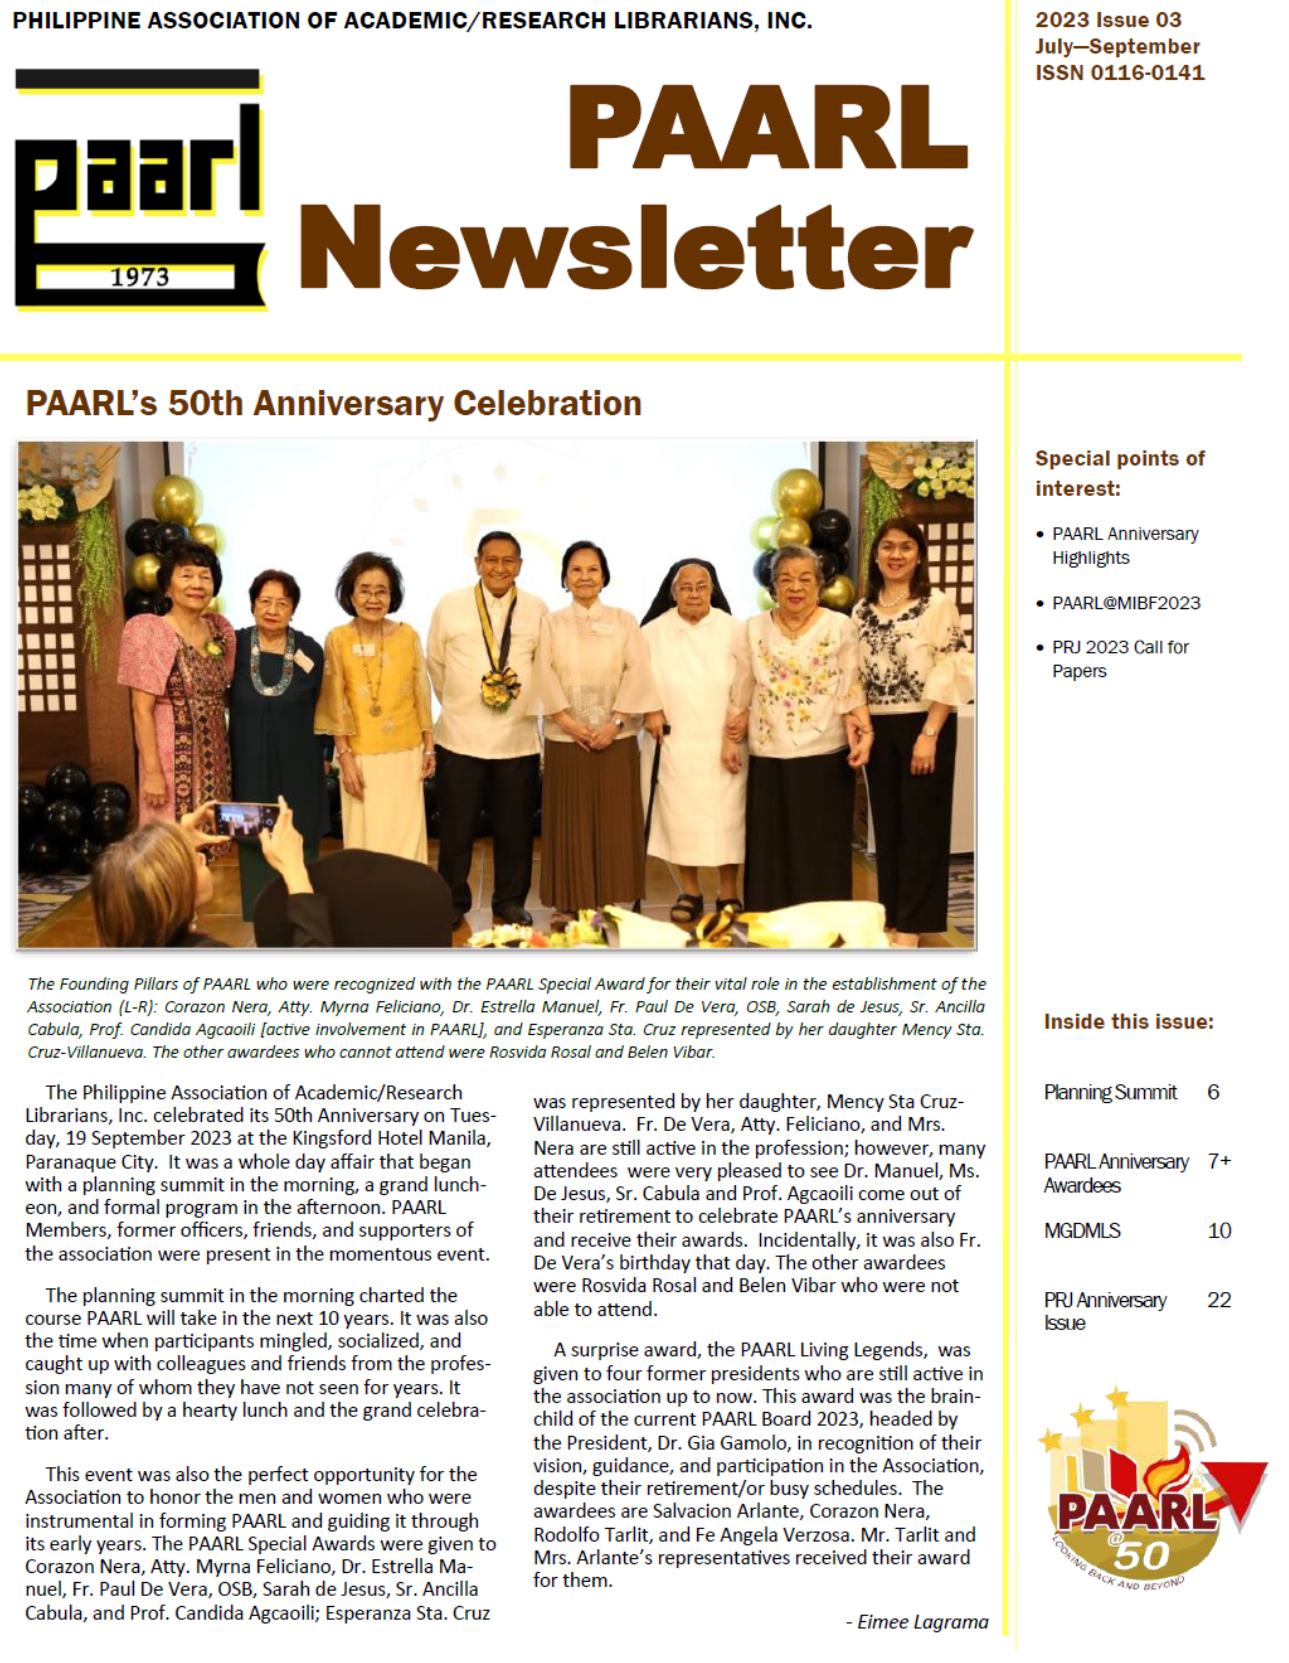 Latest PAARL Newsletter, hot off the press!